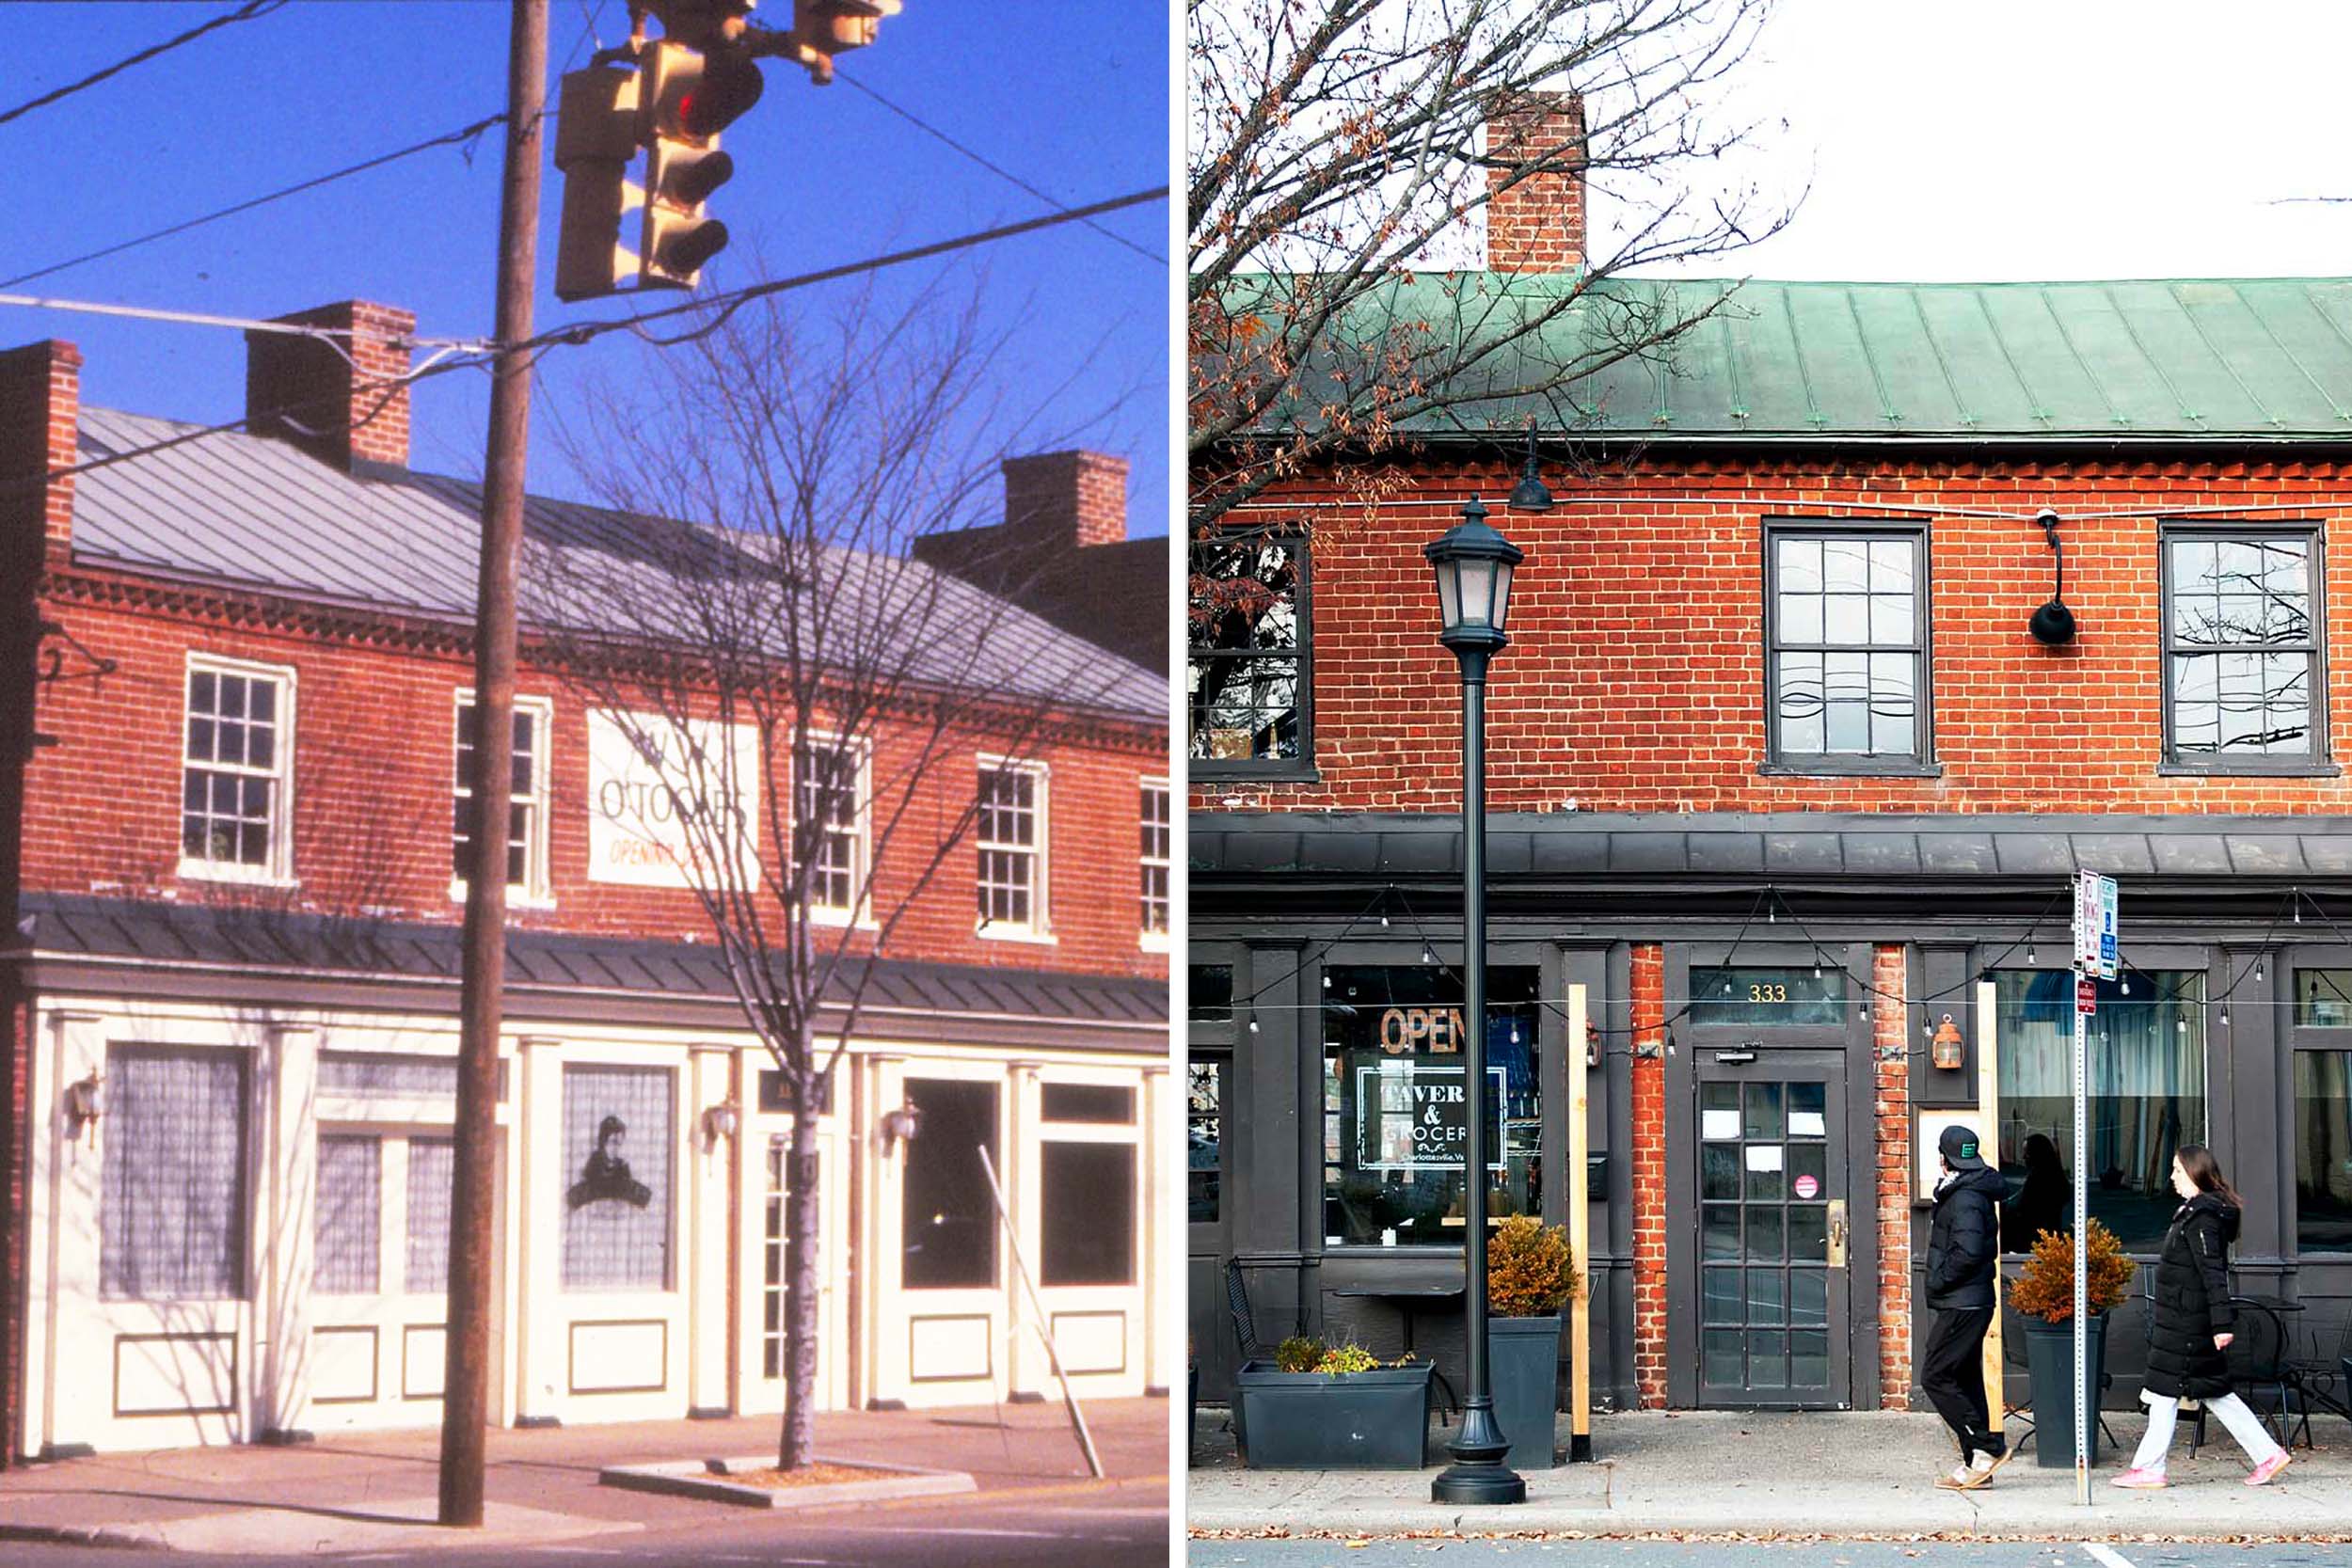 Inge’s grocery store years ago, left, and Inge’s grocery store now, right